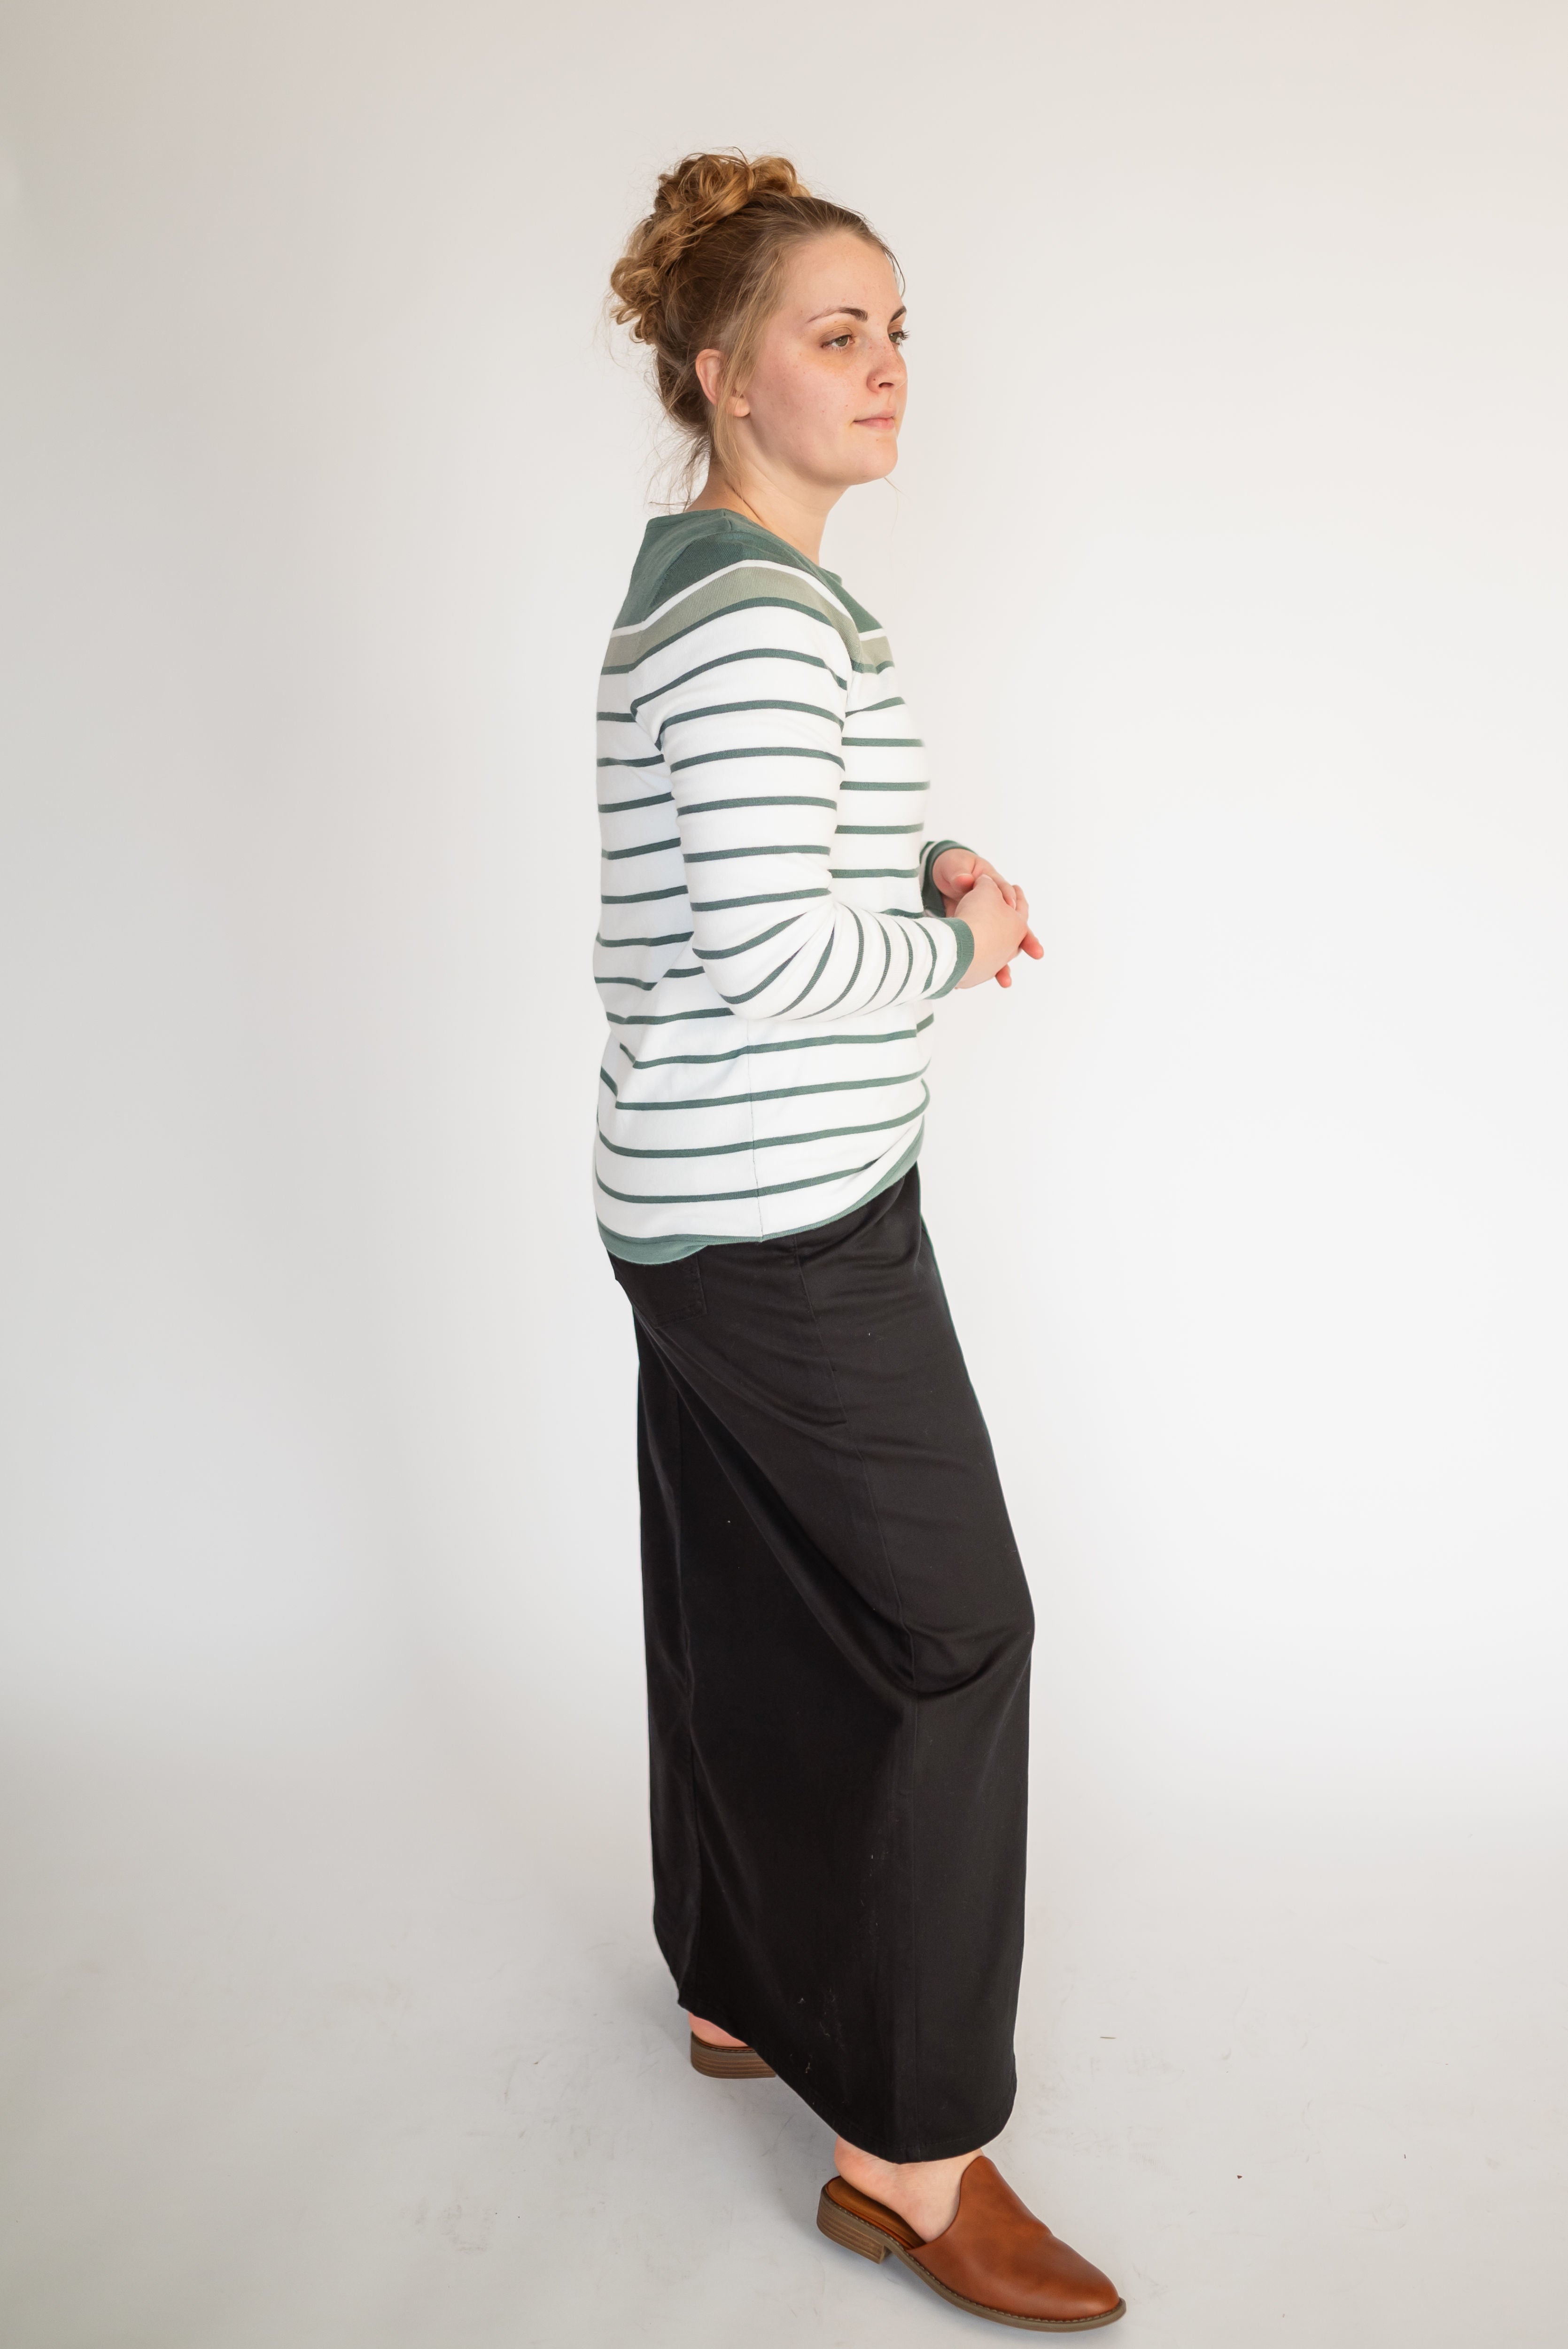 Kimberly Striped Sweater in Ivory and Dusty Olive